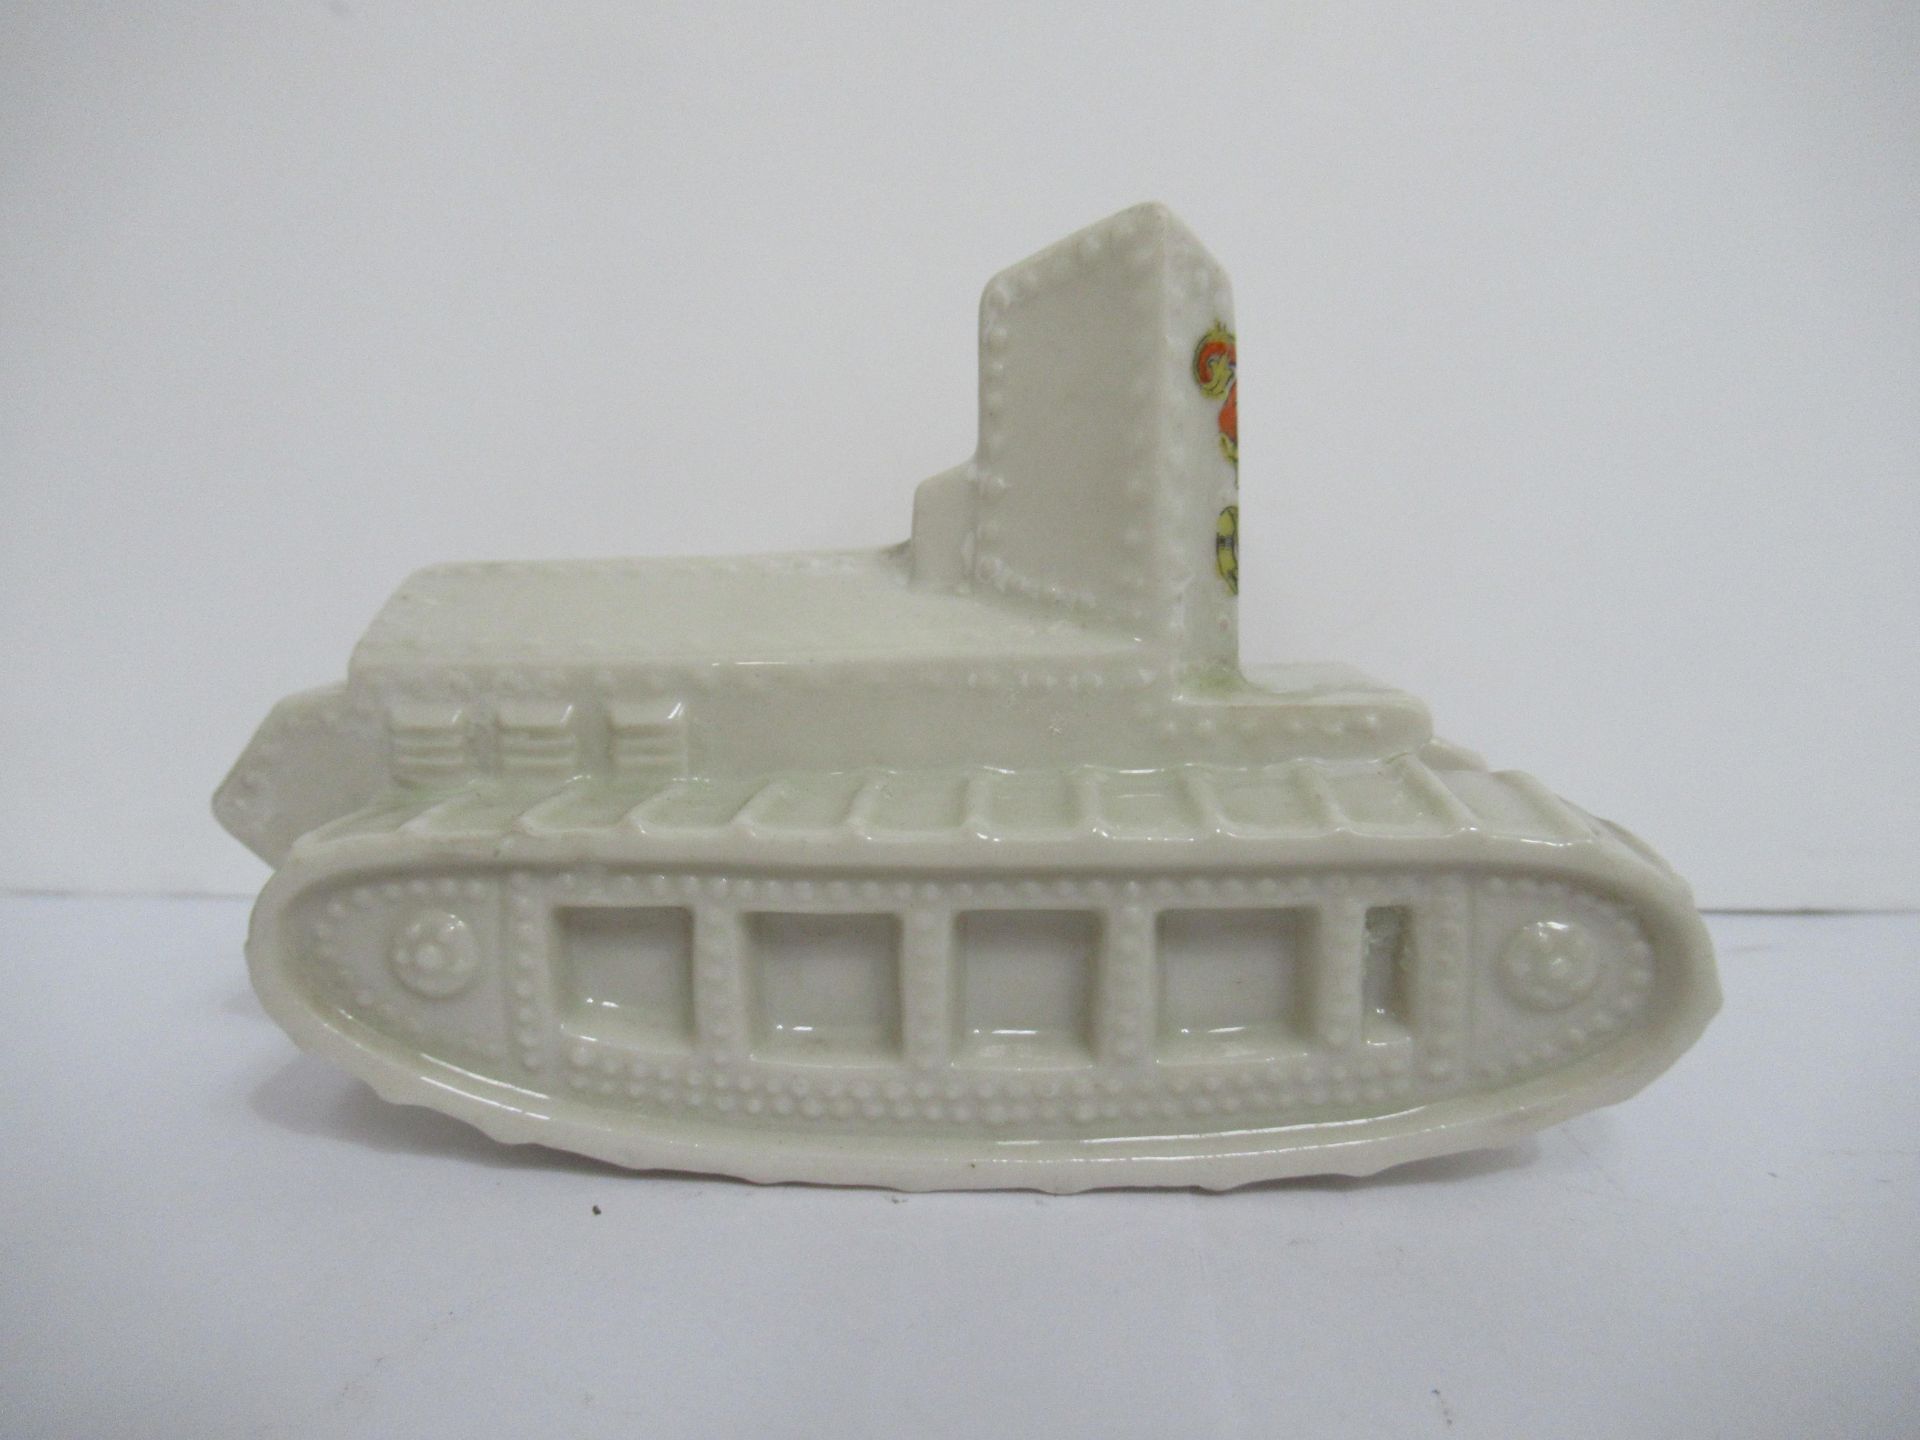 Crested China model of tracked vehicle with Cleethorpes coat of arms (115mm x 60mm)